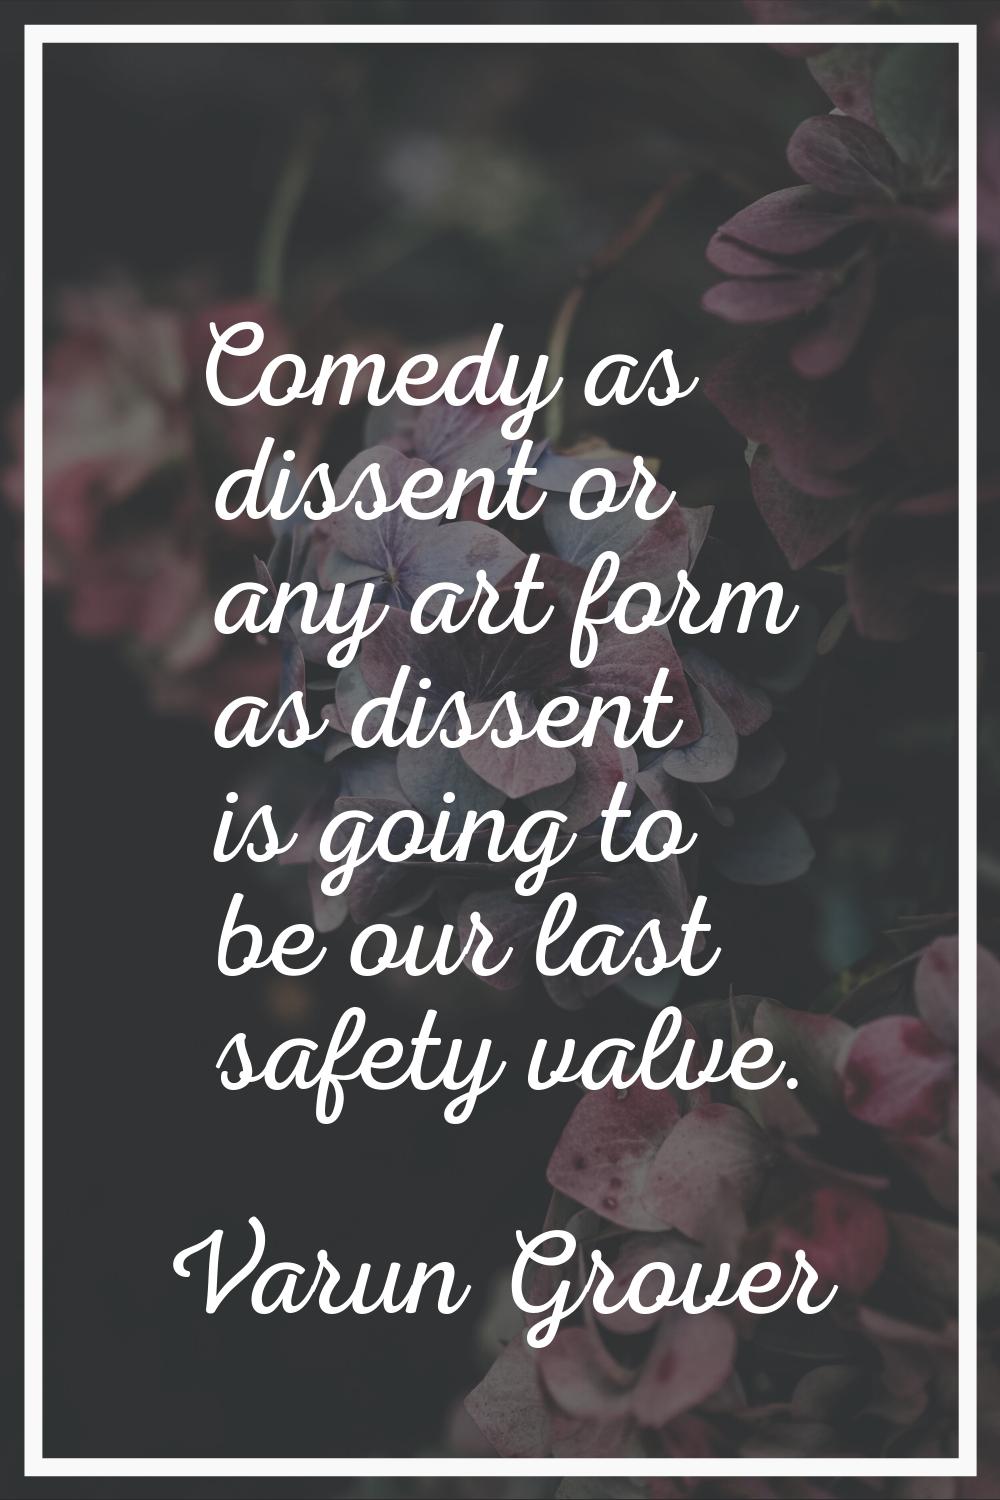 Comedy as dissent or any art form as dissent is going to be our last safety valve.